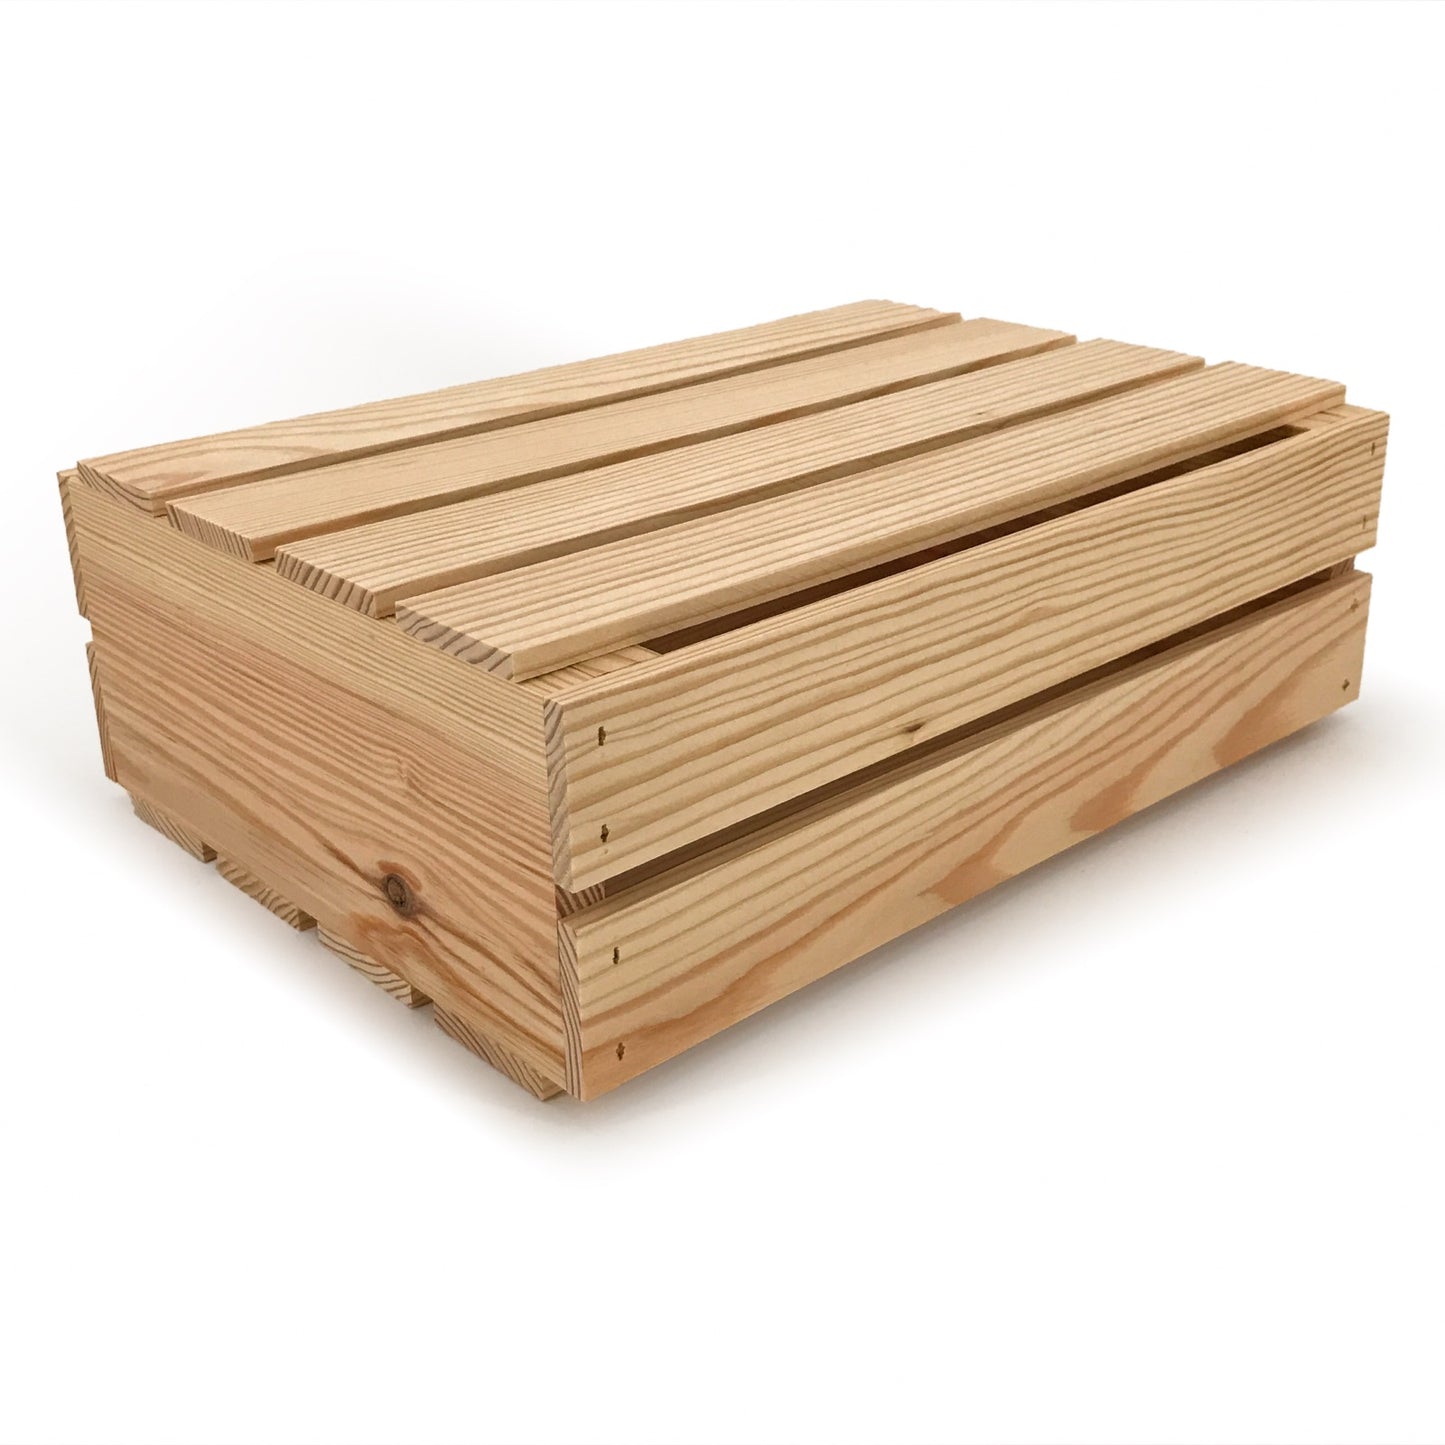 Small wooden crate with lid 16x12x5.25, 6-WS-16-12-5.25-NX-NW-LL, 12-WS-16-12-5.25-NX-NW-LL, 24-WS-16-12-5.25-NX-NW-LL, 48-WS-16-12-5.25-NX-NW-LL, 96-WS-16-12-5.25-NX-NW-LL